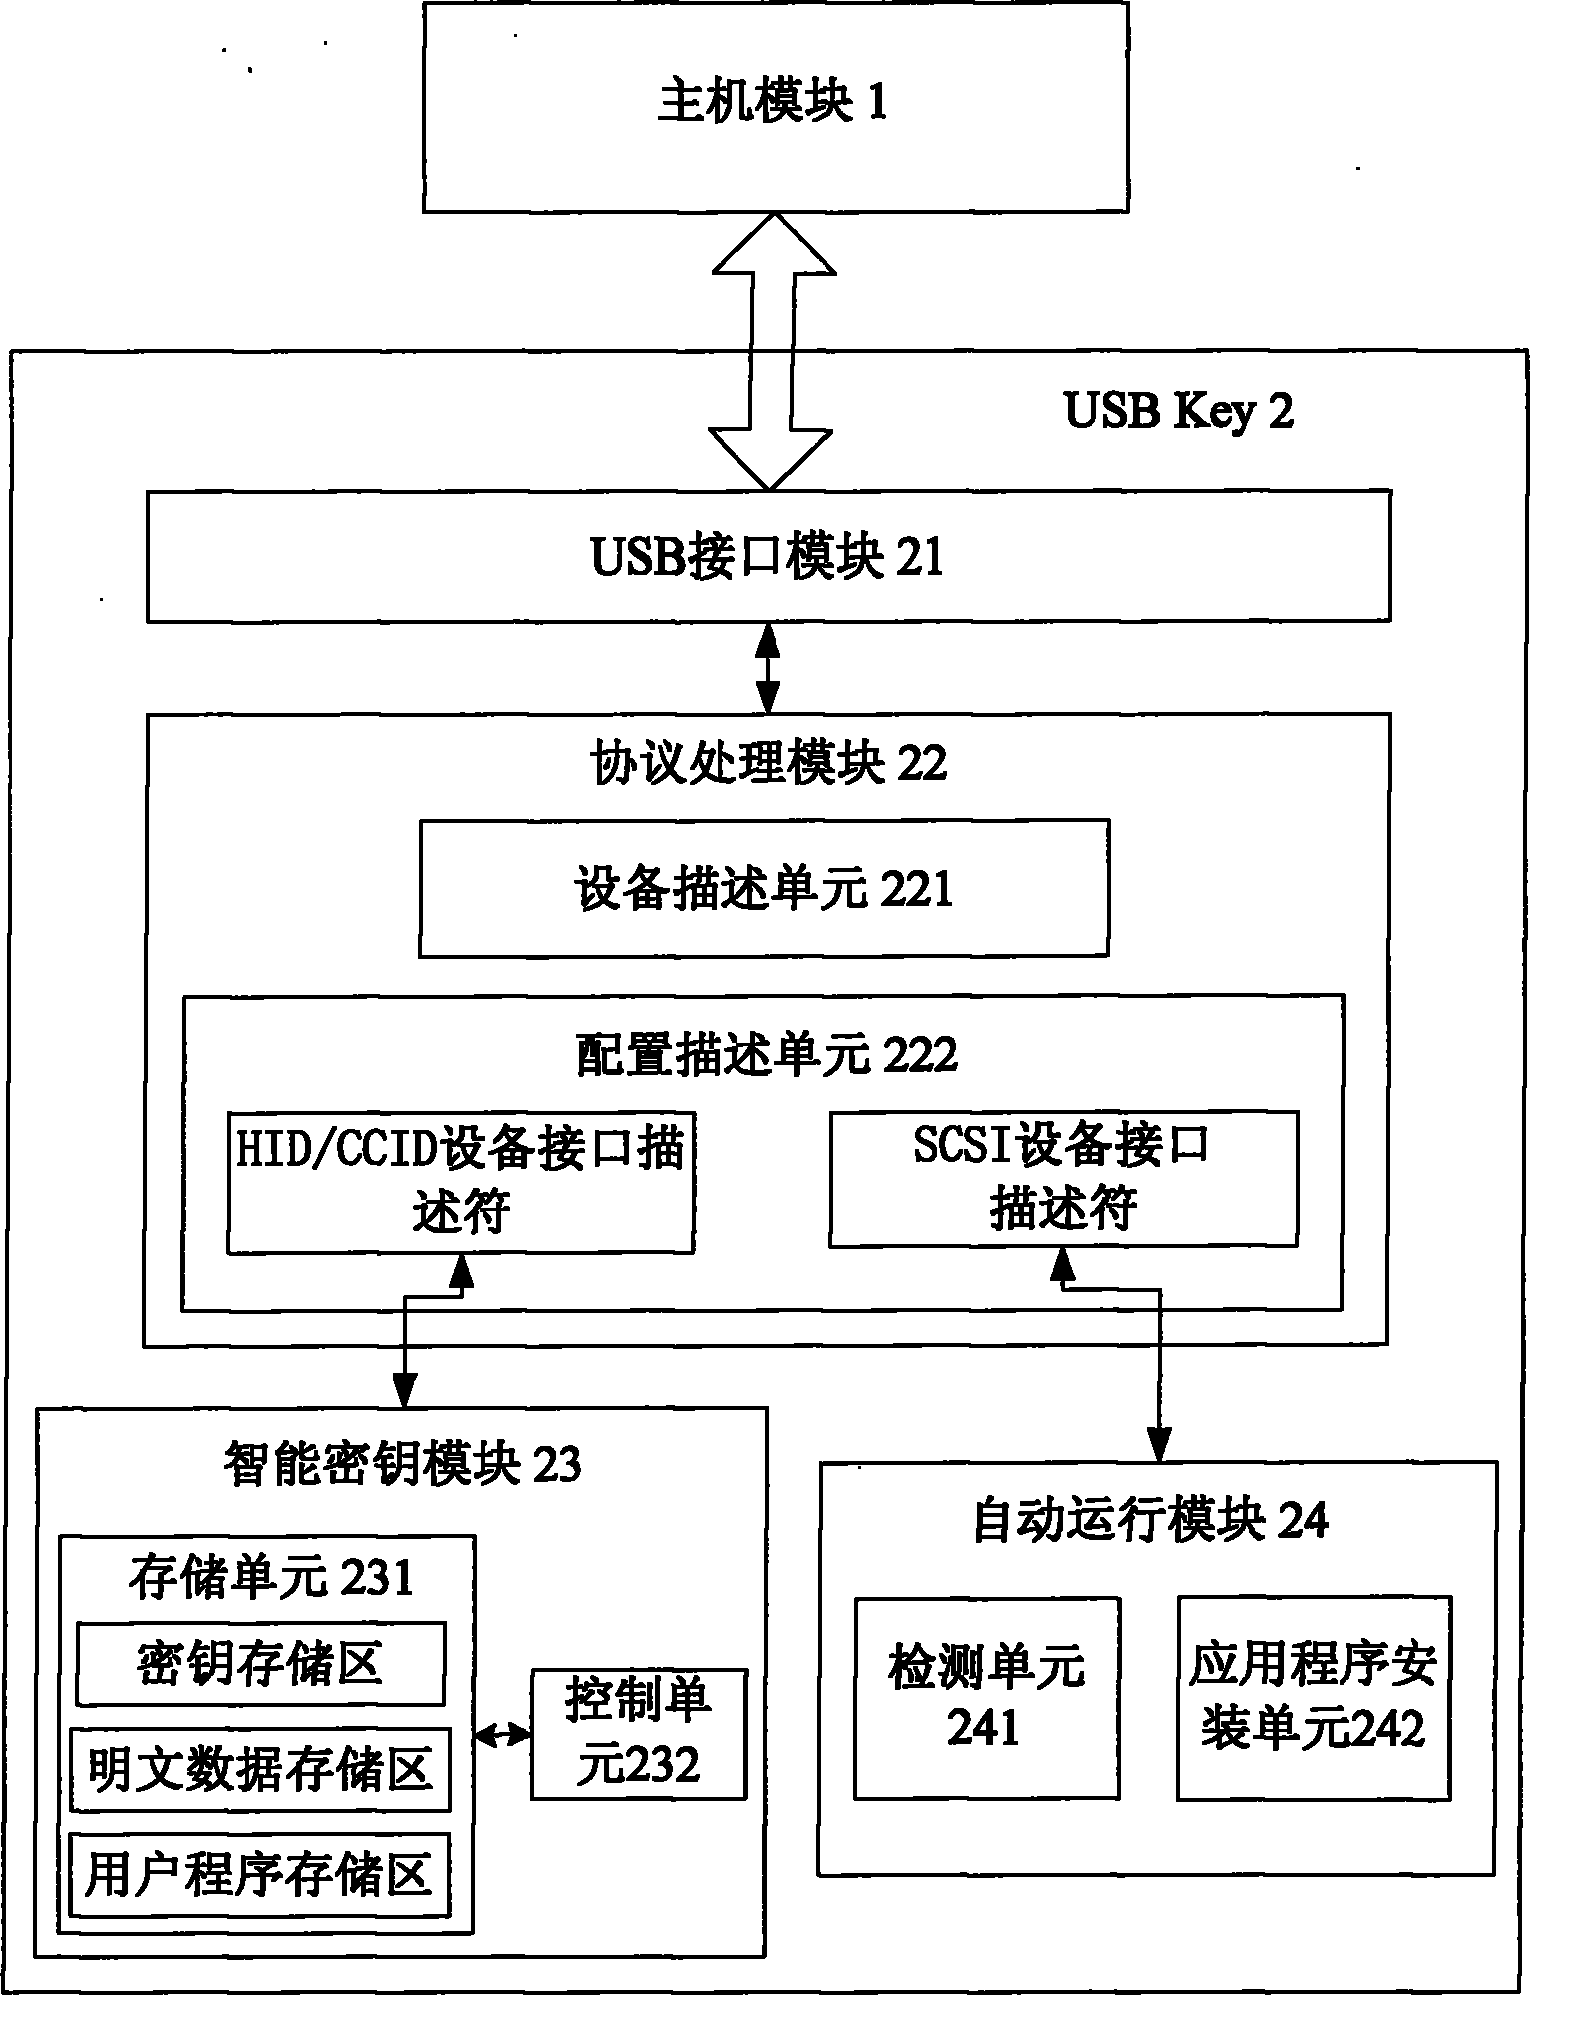 System and method for realizing multifunctional information security device